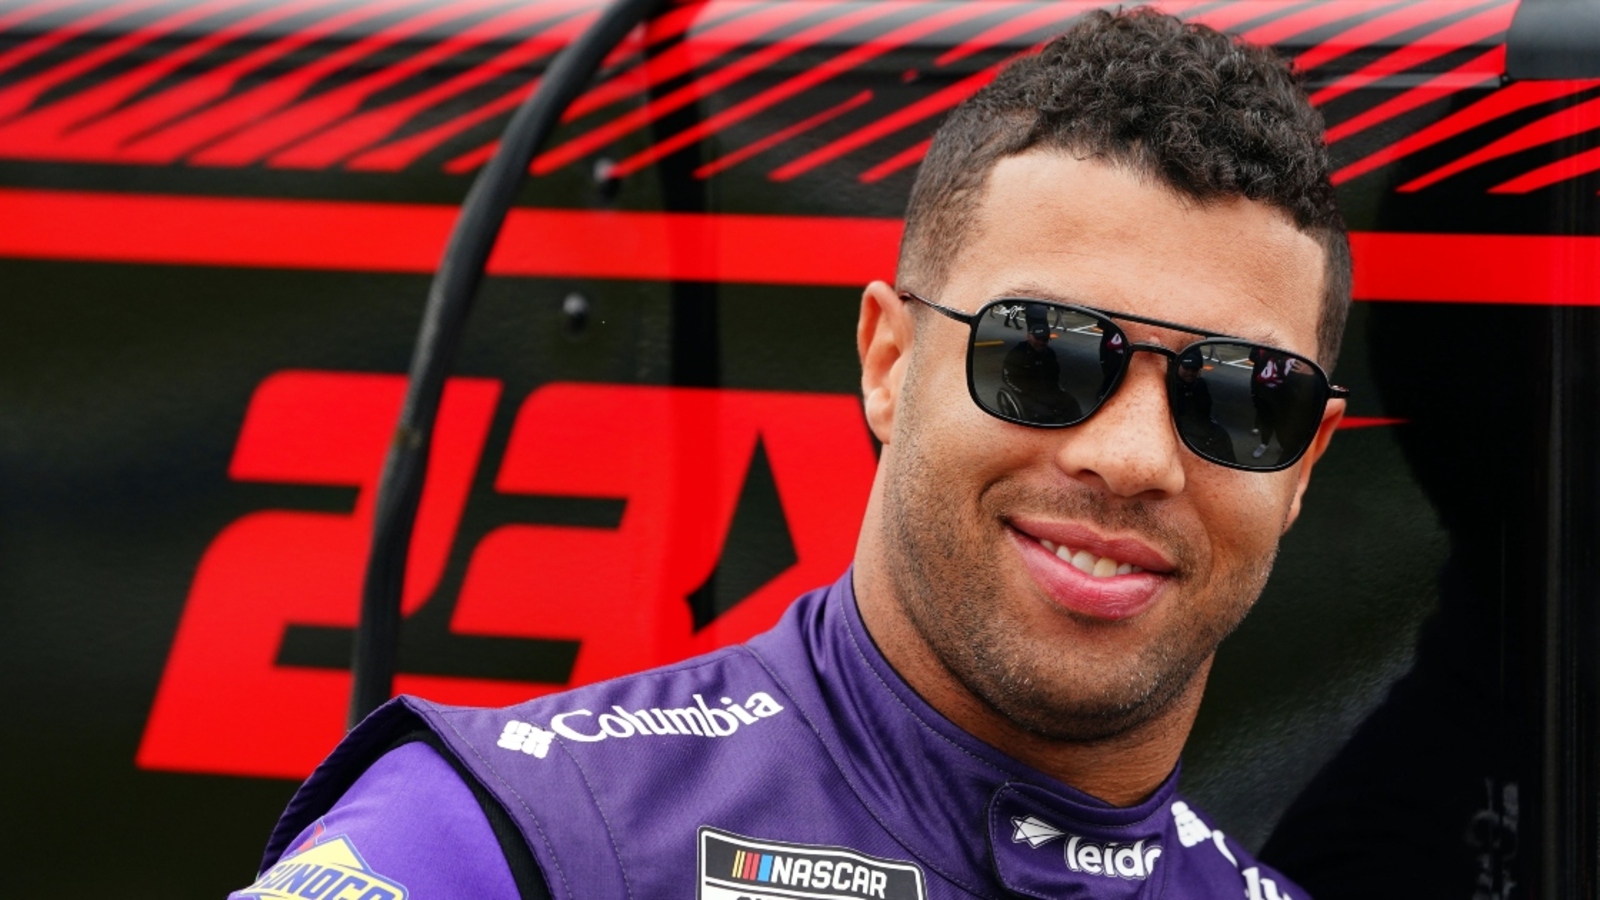 Bubba Wallace jokes he won’t give Kyle Larson GOAT title after failing to win pole at Indy 500